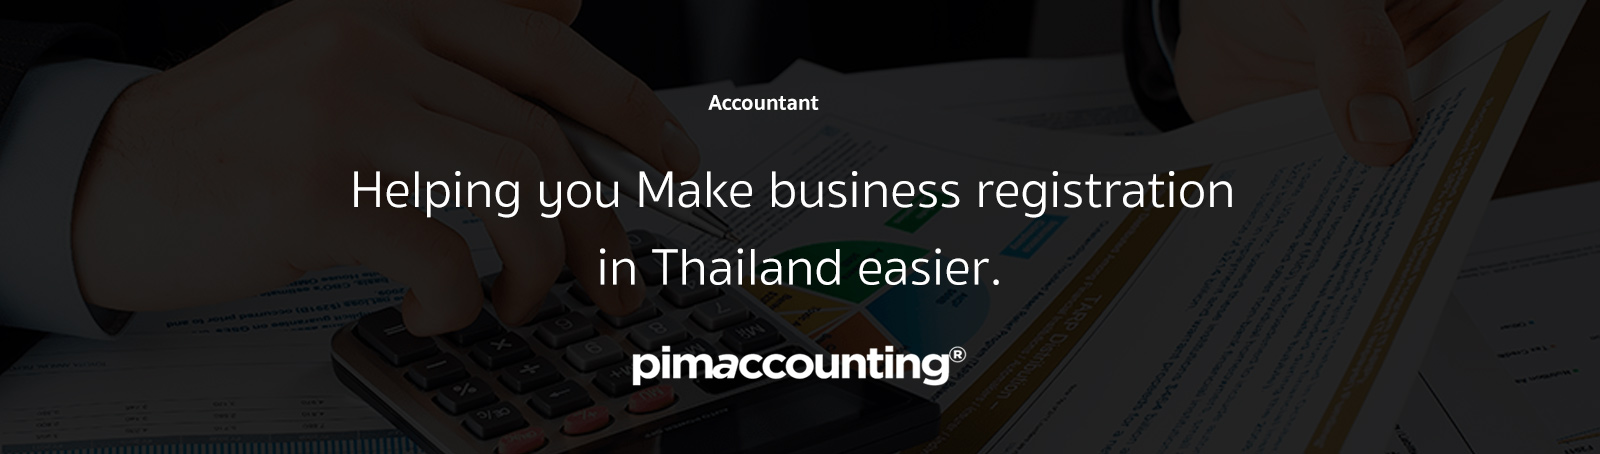 Helping you Make business registration in Thailand easier